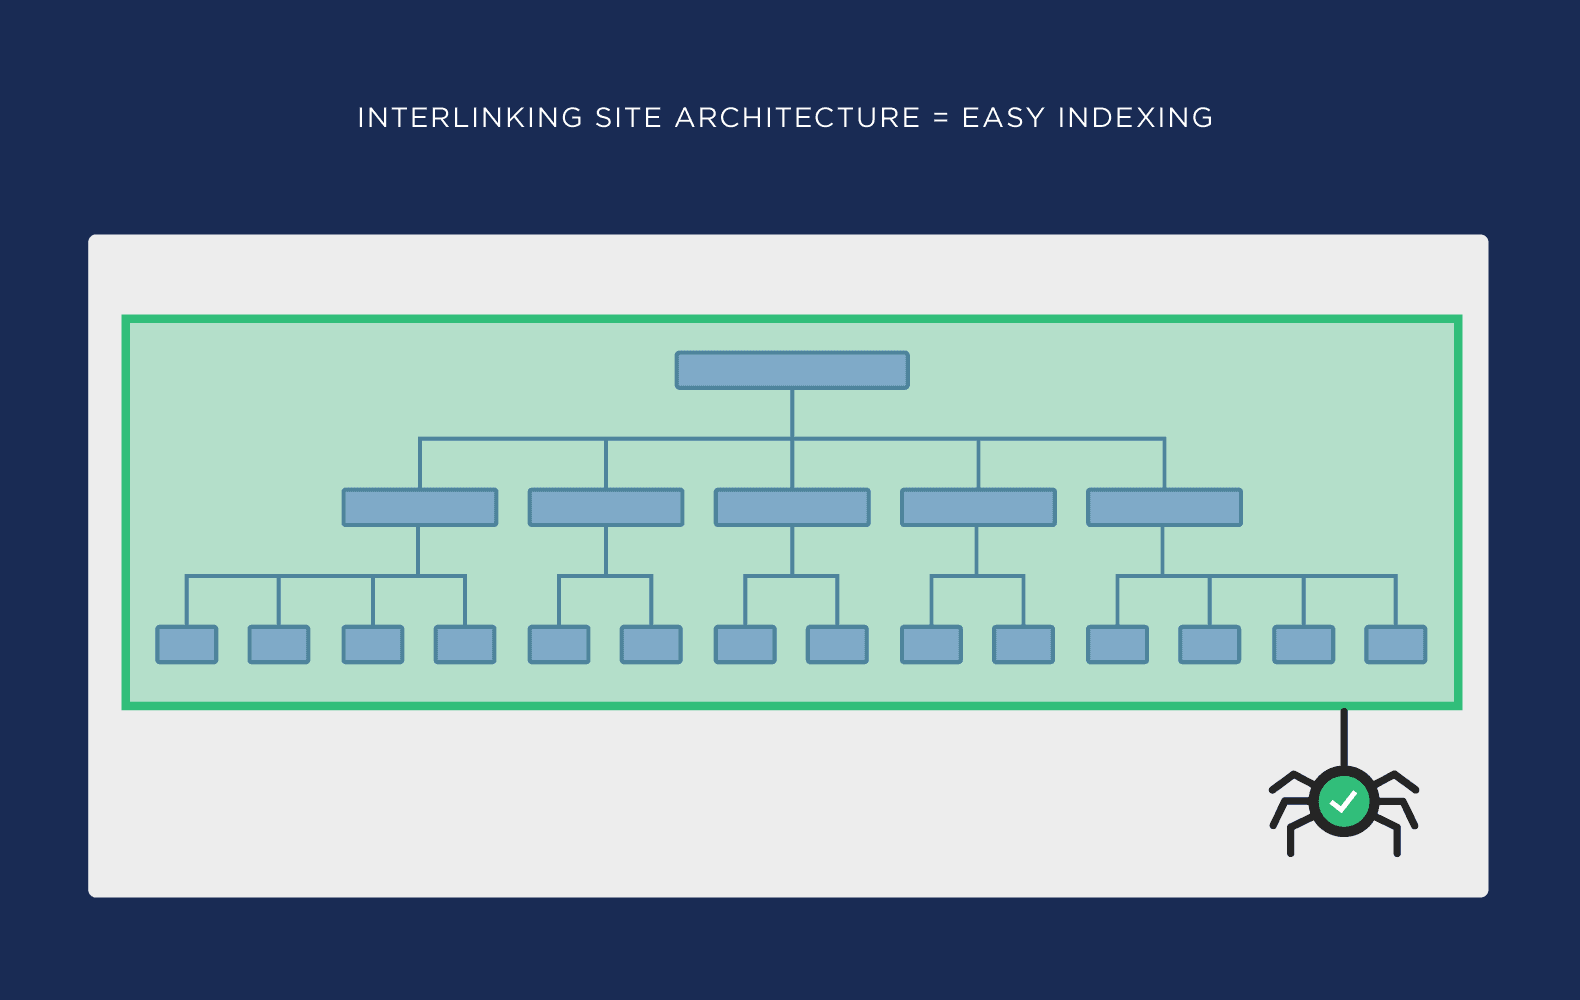 Interlinking site architecture makes for easy indexing